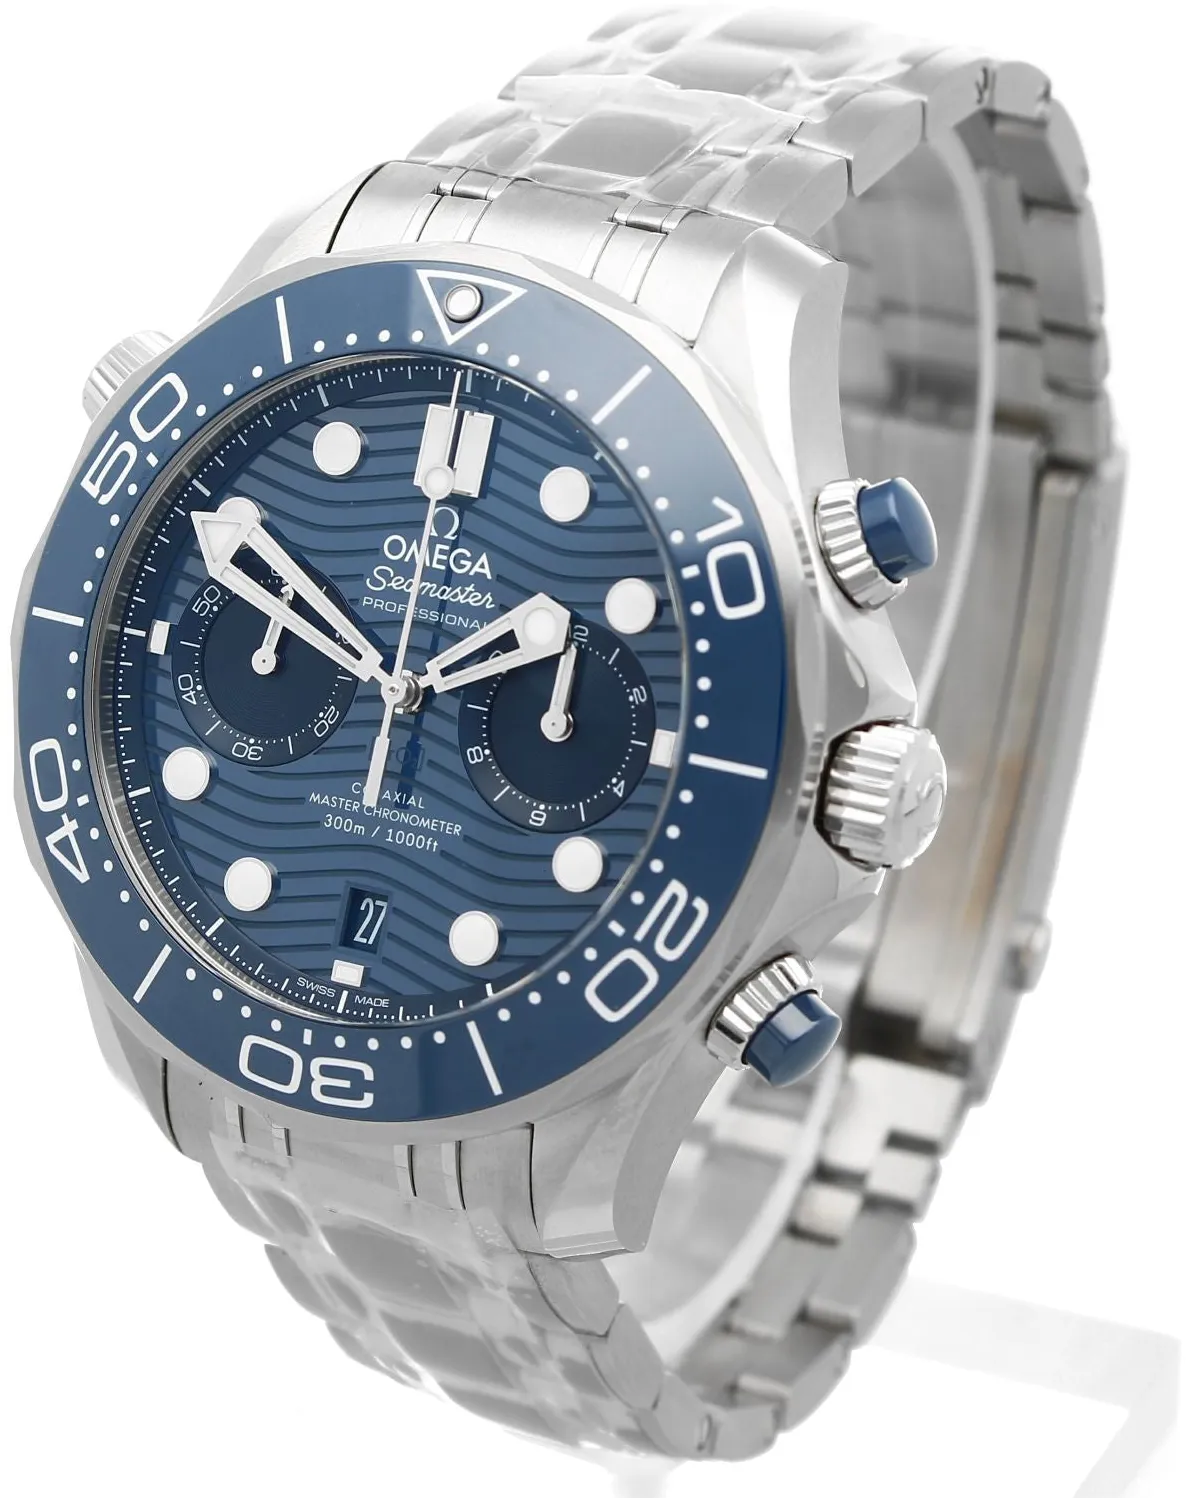 Omega Seamaster Diver 300M 210.30.44.51.03.001 42mm Stainless steel Blue 1